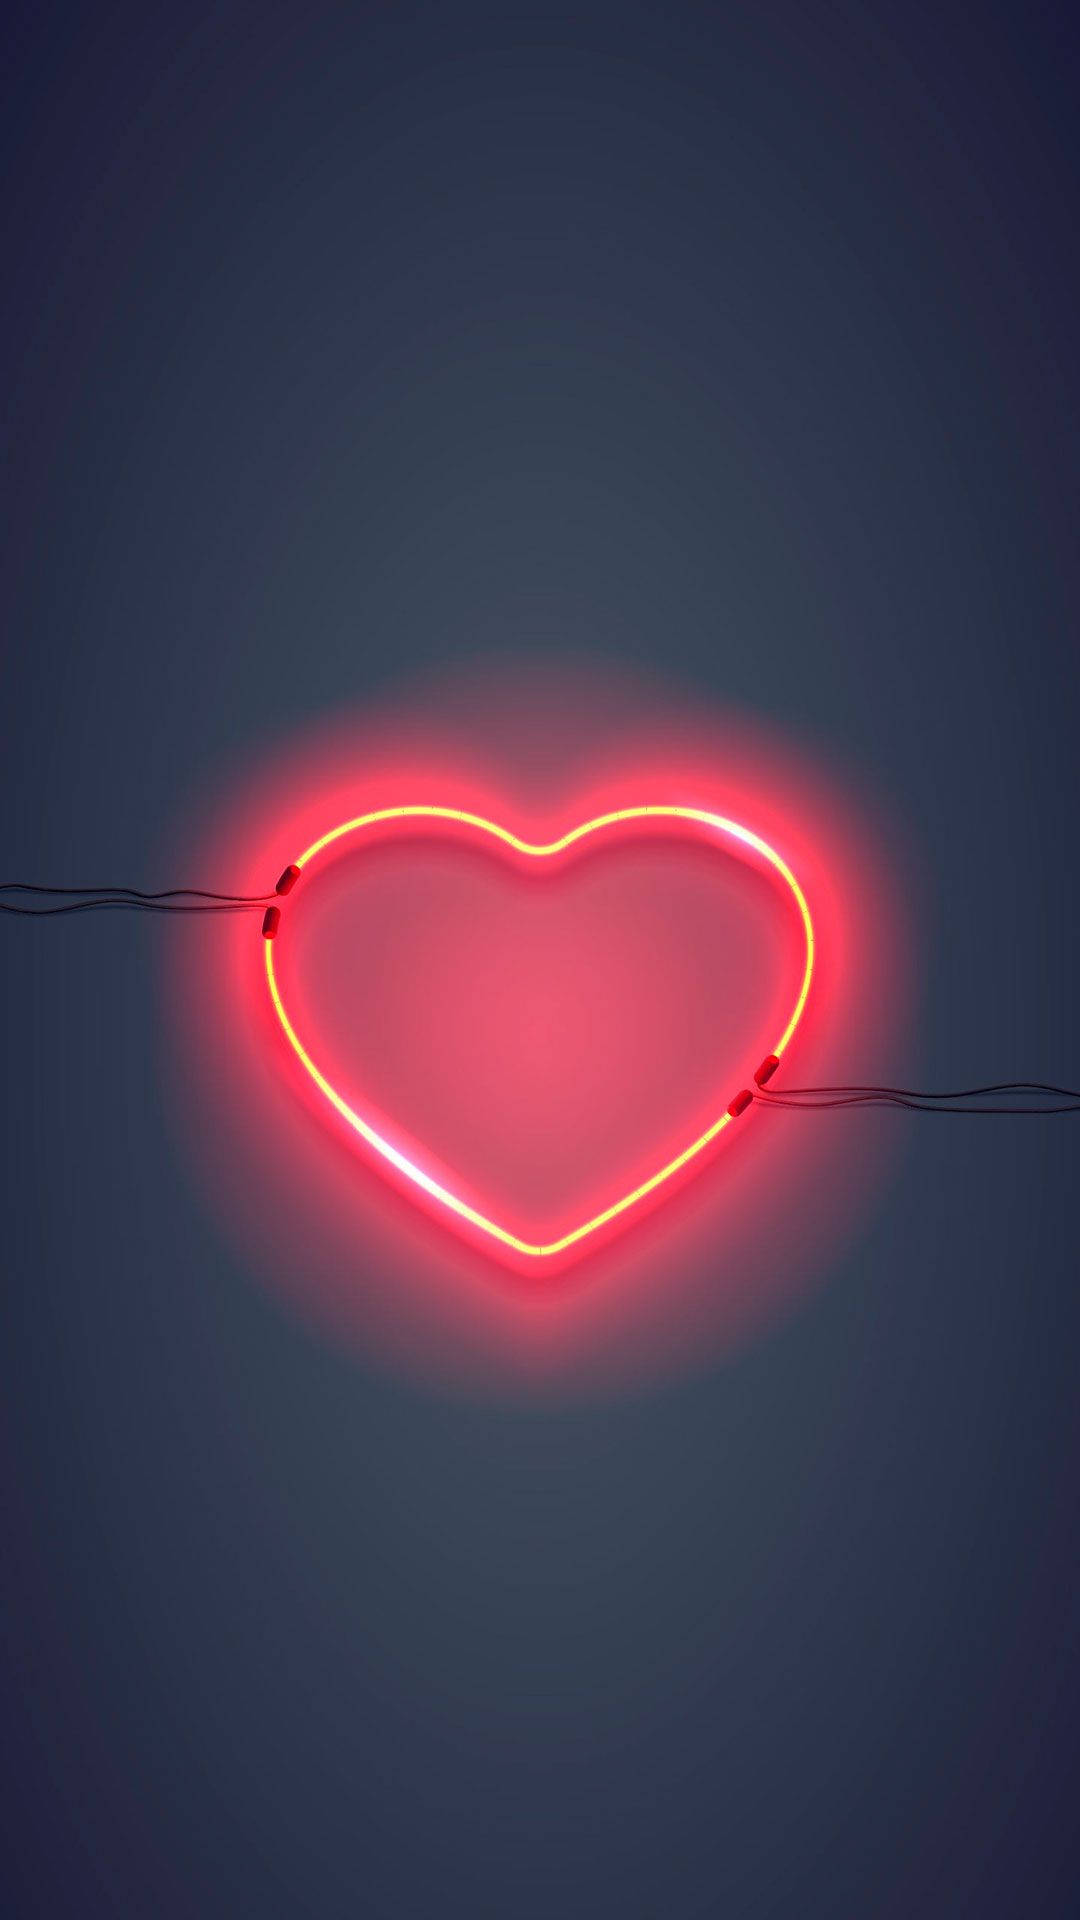 Captivating Heart Aesthetics On An Iphone Display Wallpaper